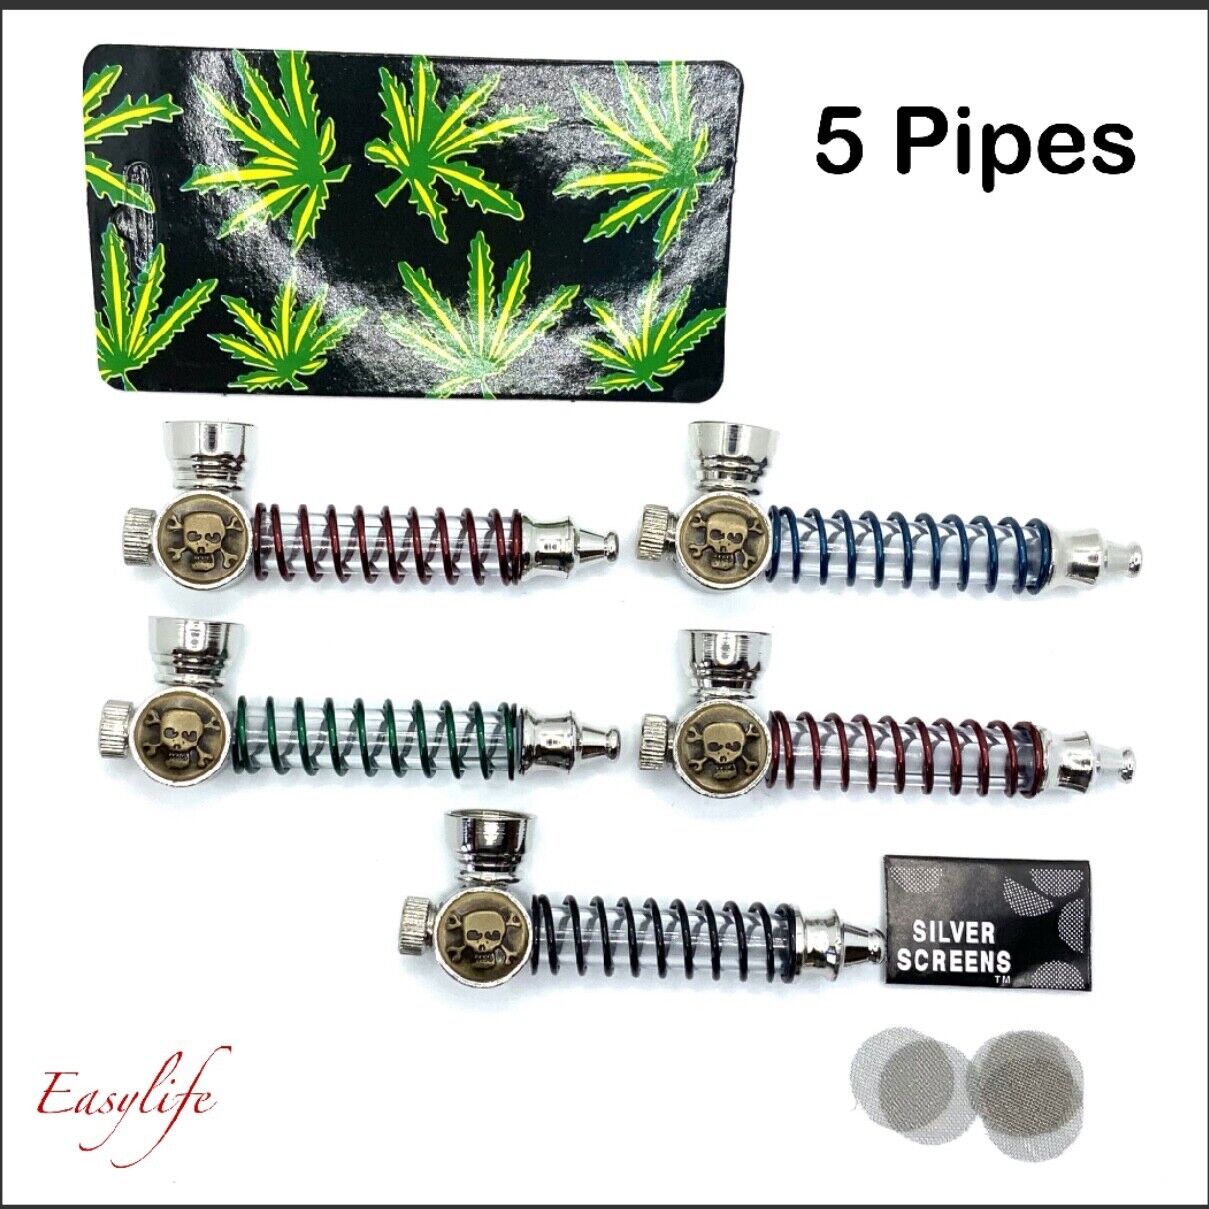 5 X Metal Pipes Each With 5 Filters, SAME DAY SHIP